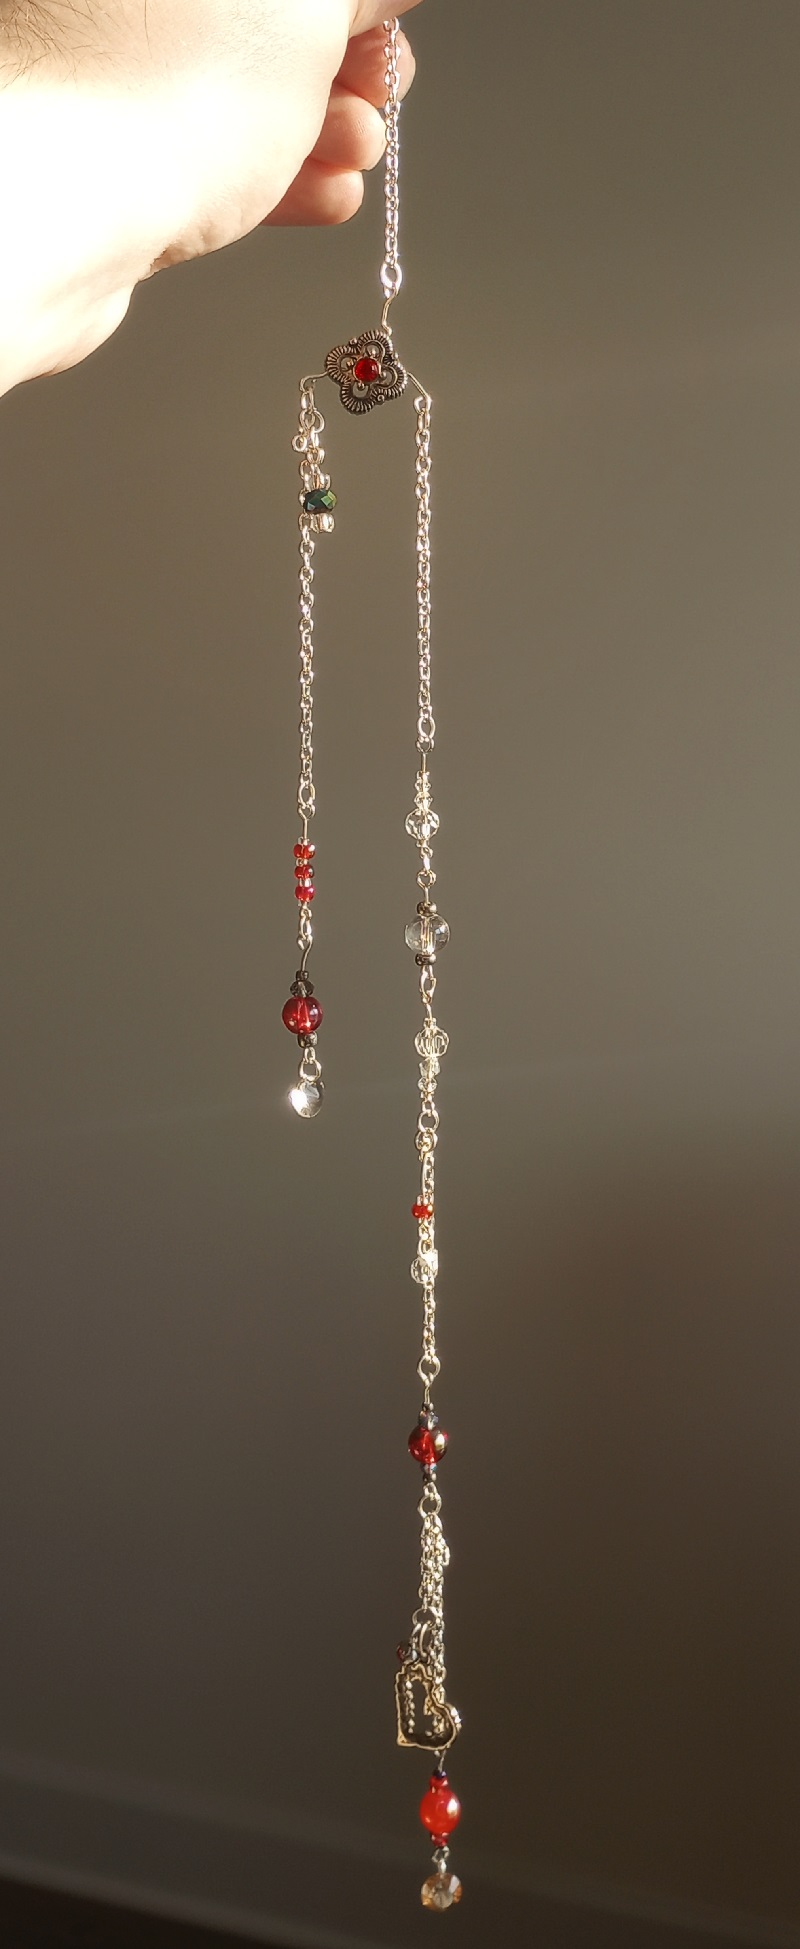 red themed sun catcher with with two dangles, the longer having a metal heart